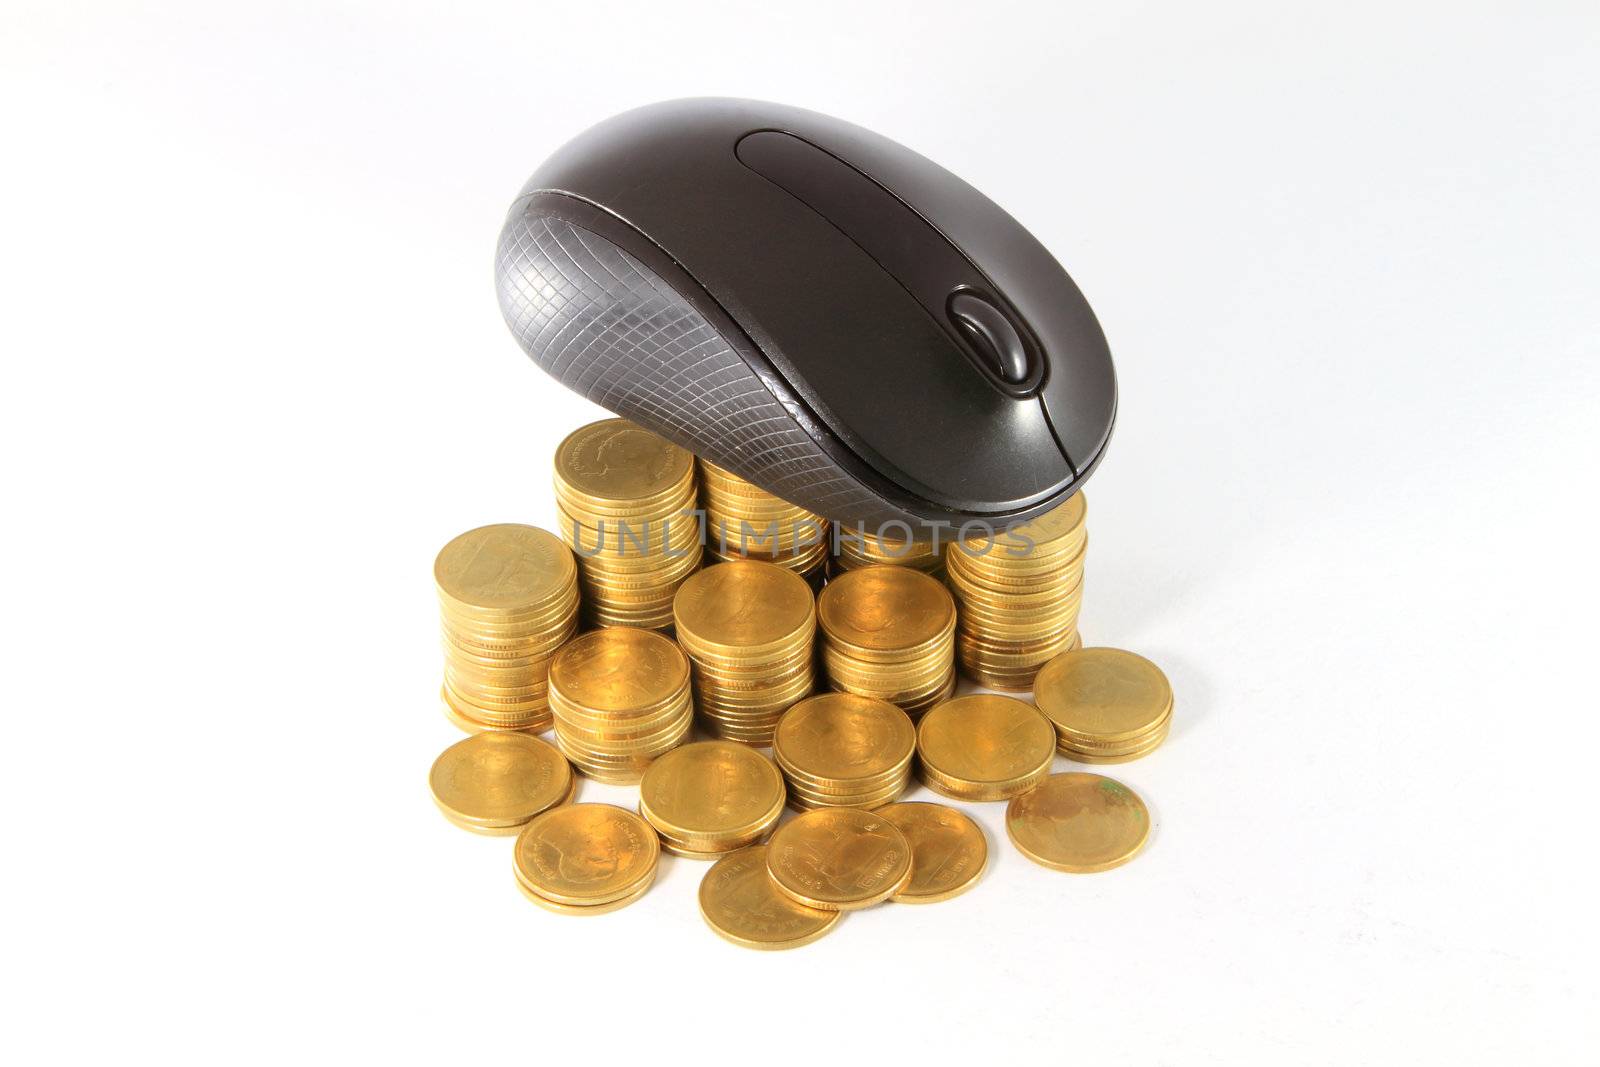 black computer mouse and golden coin